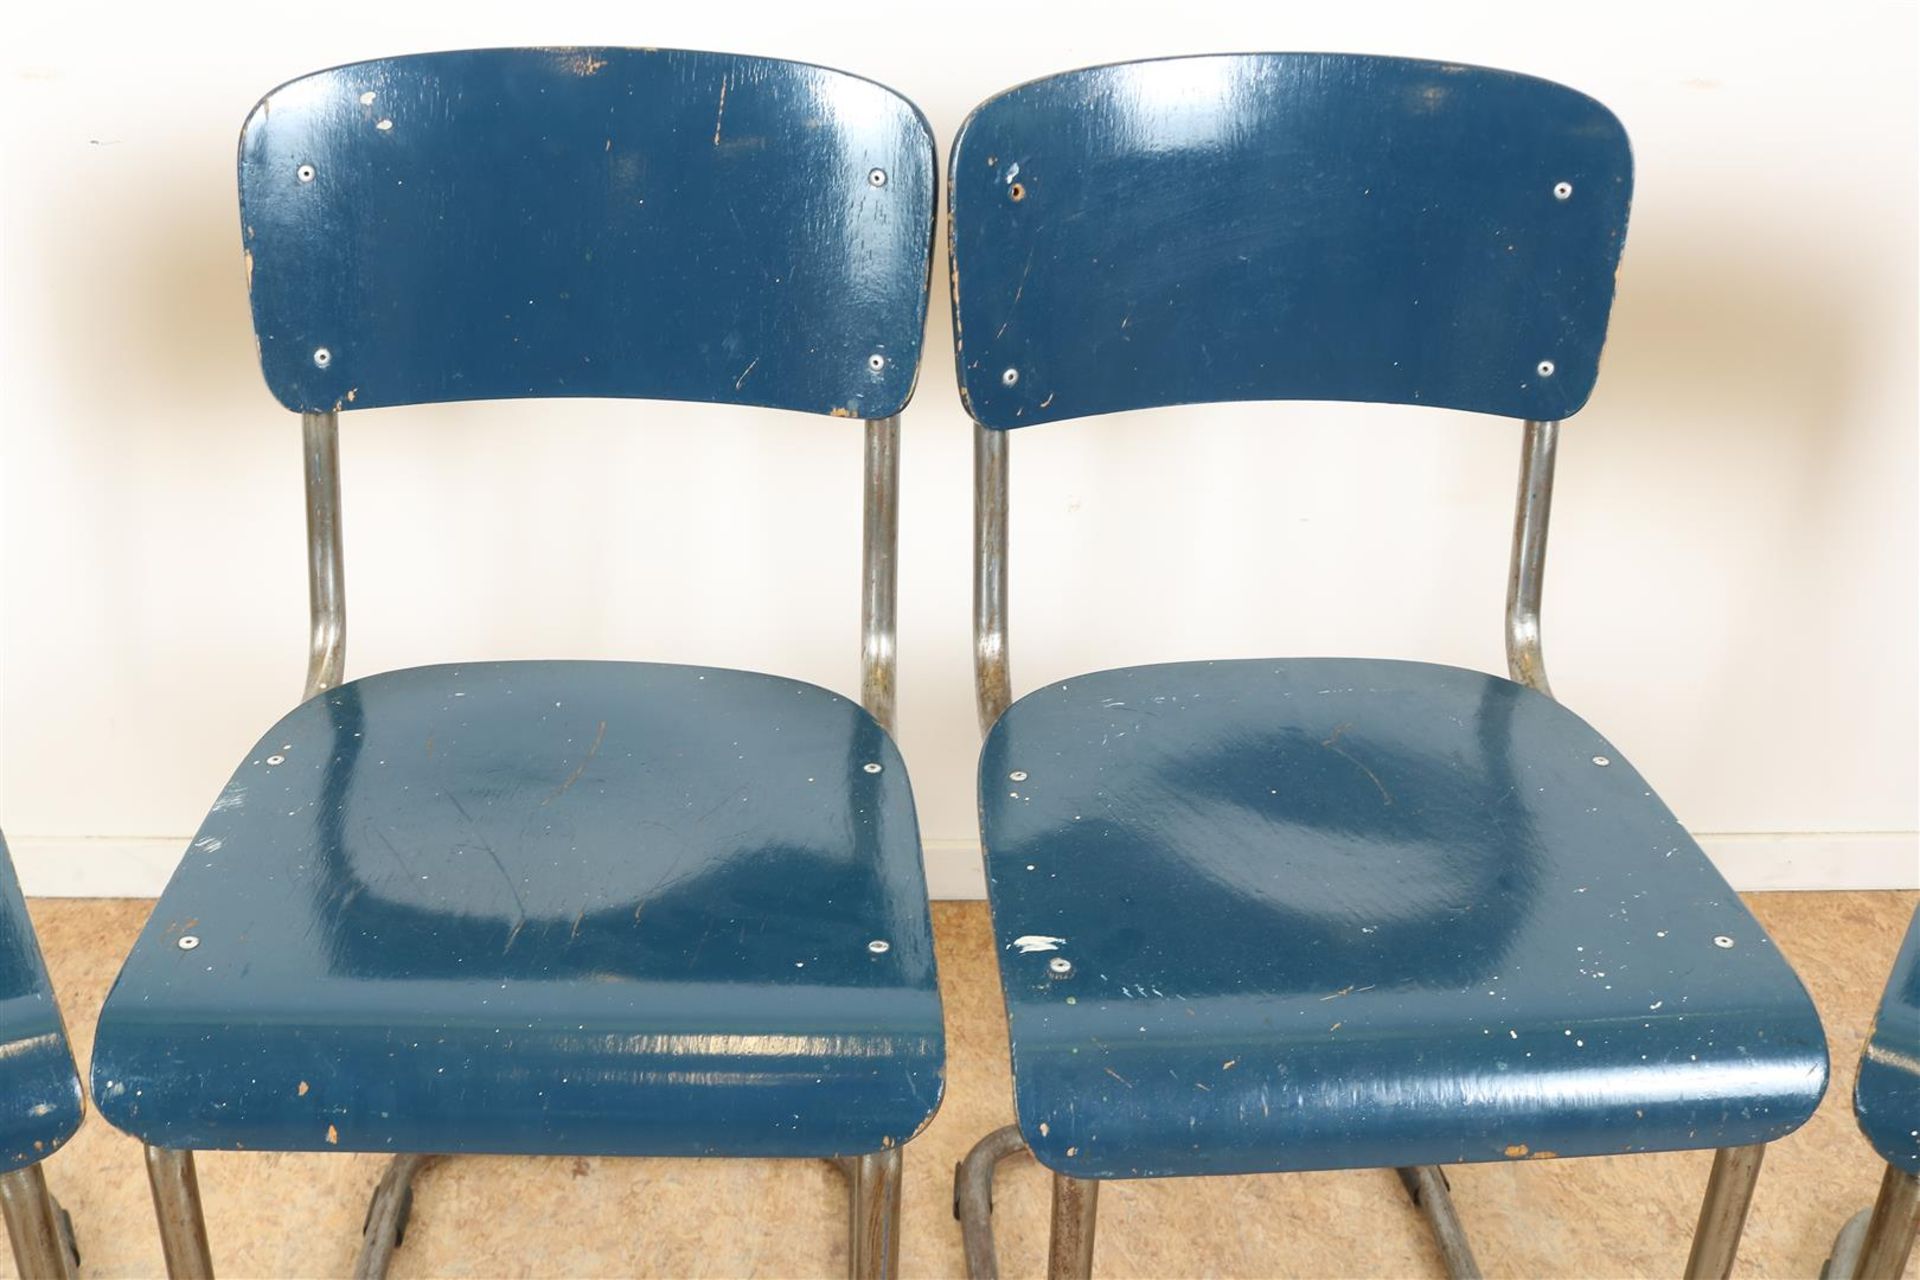 Series of 4 chrome tube Gispen chairs with blue wooden seat and backrest, model 107, produced - Image 2 of 4